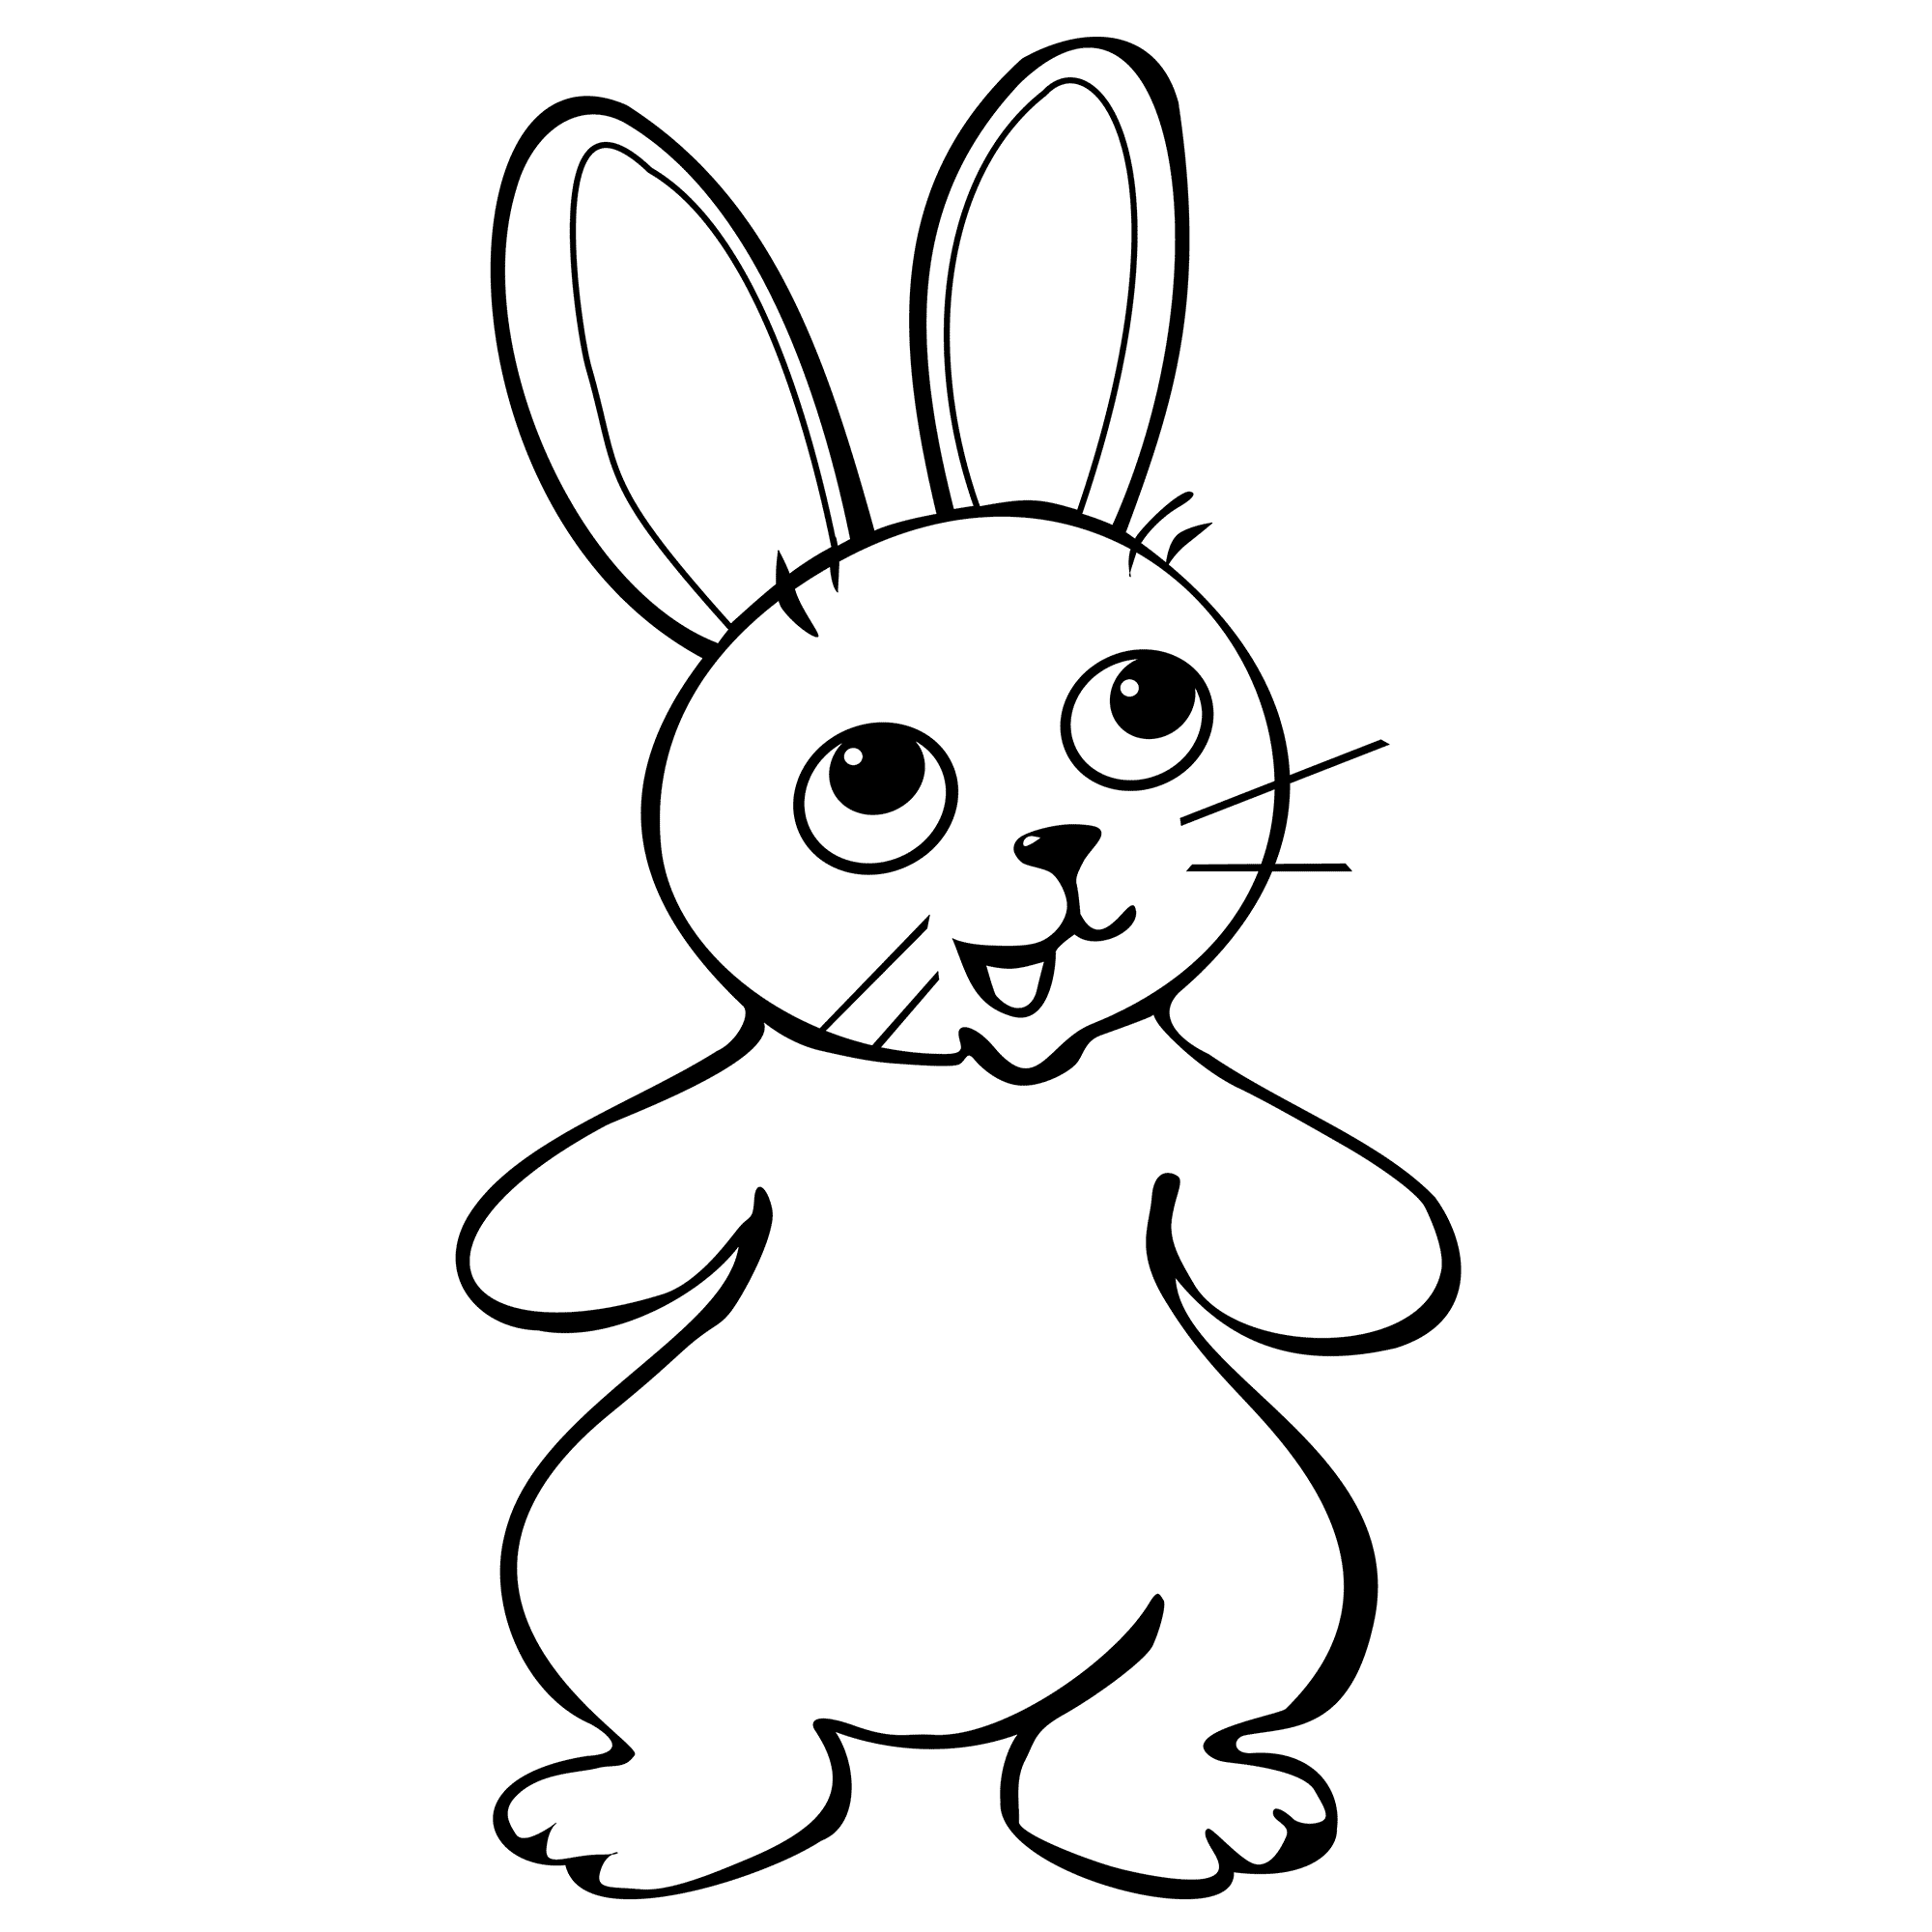 bunny pictures to color bunny coloring pages best coloring pages for kids color bunny pictures to 